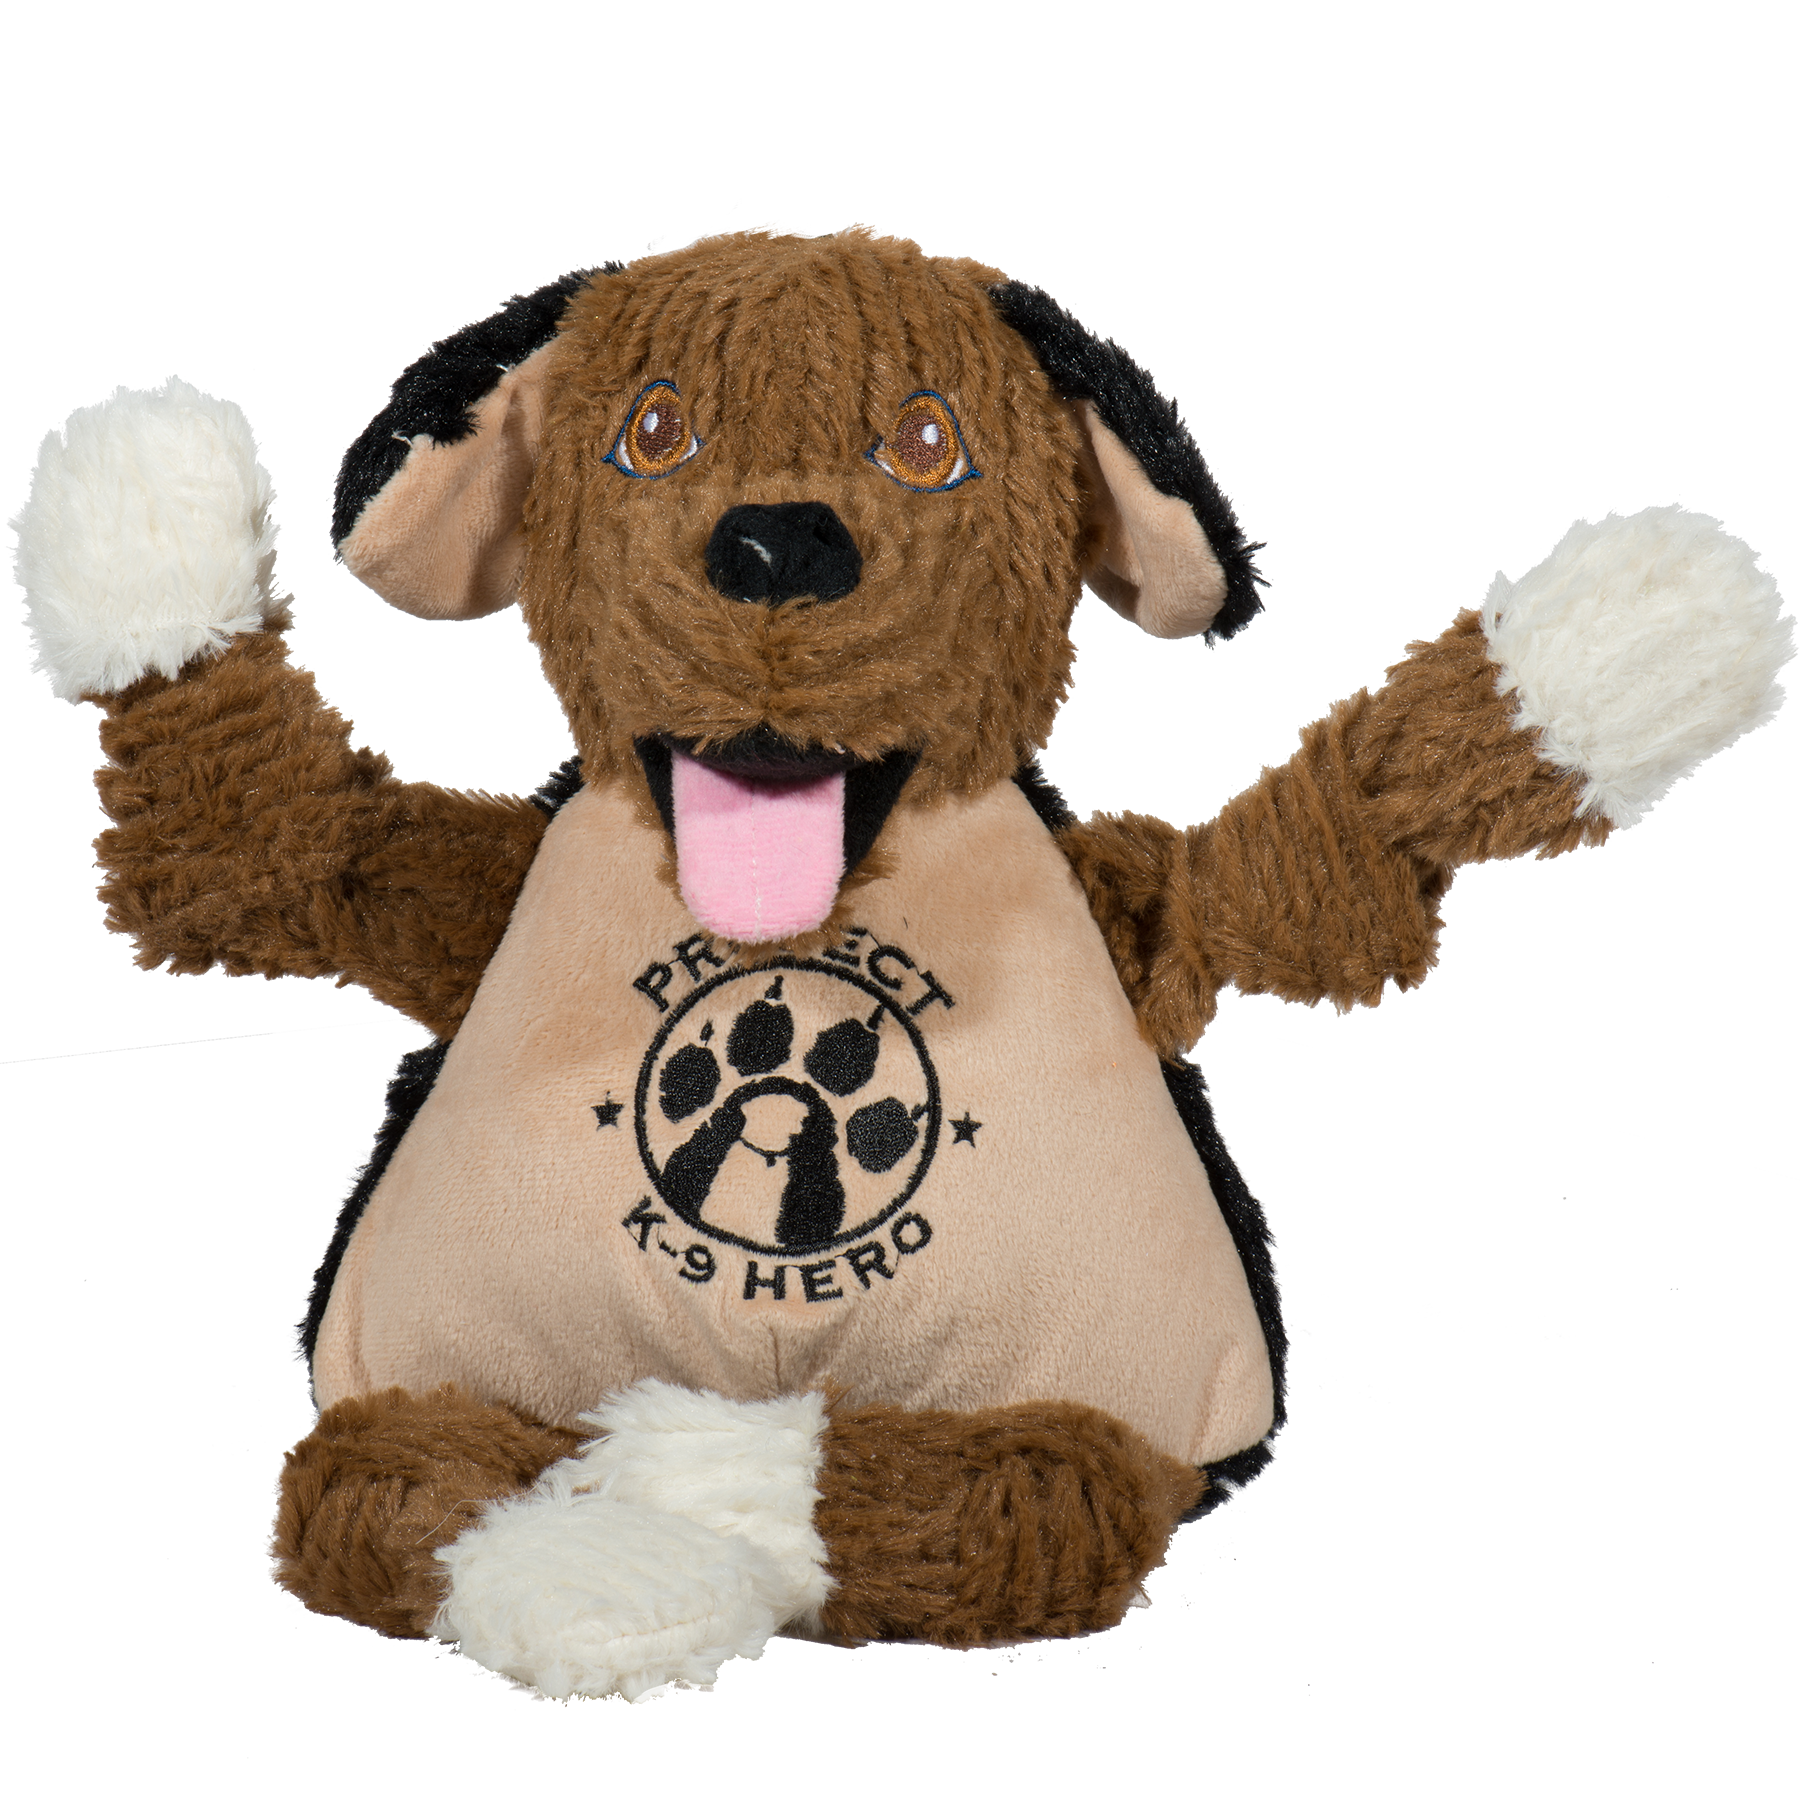 Project K-9 Hero Flash Knottie- Brown dog with black ears, and white paws. Open mouth with tongue out. Brown open eyes. "Project K-9 Hero" written on belly.